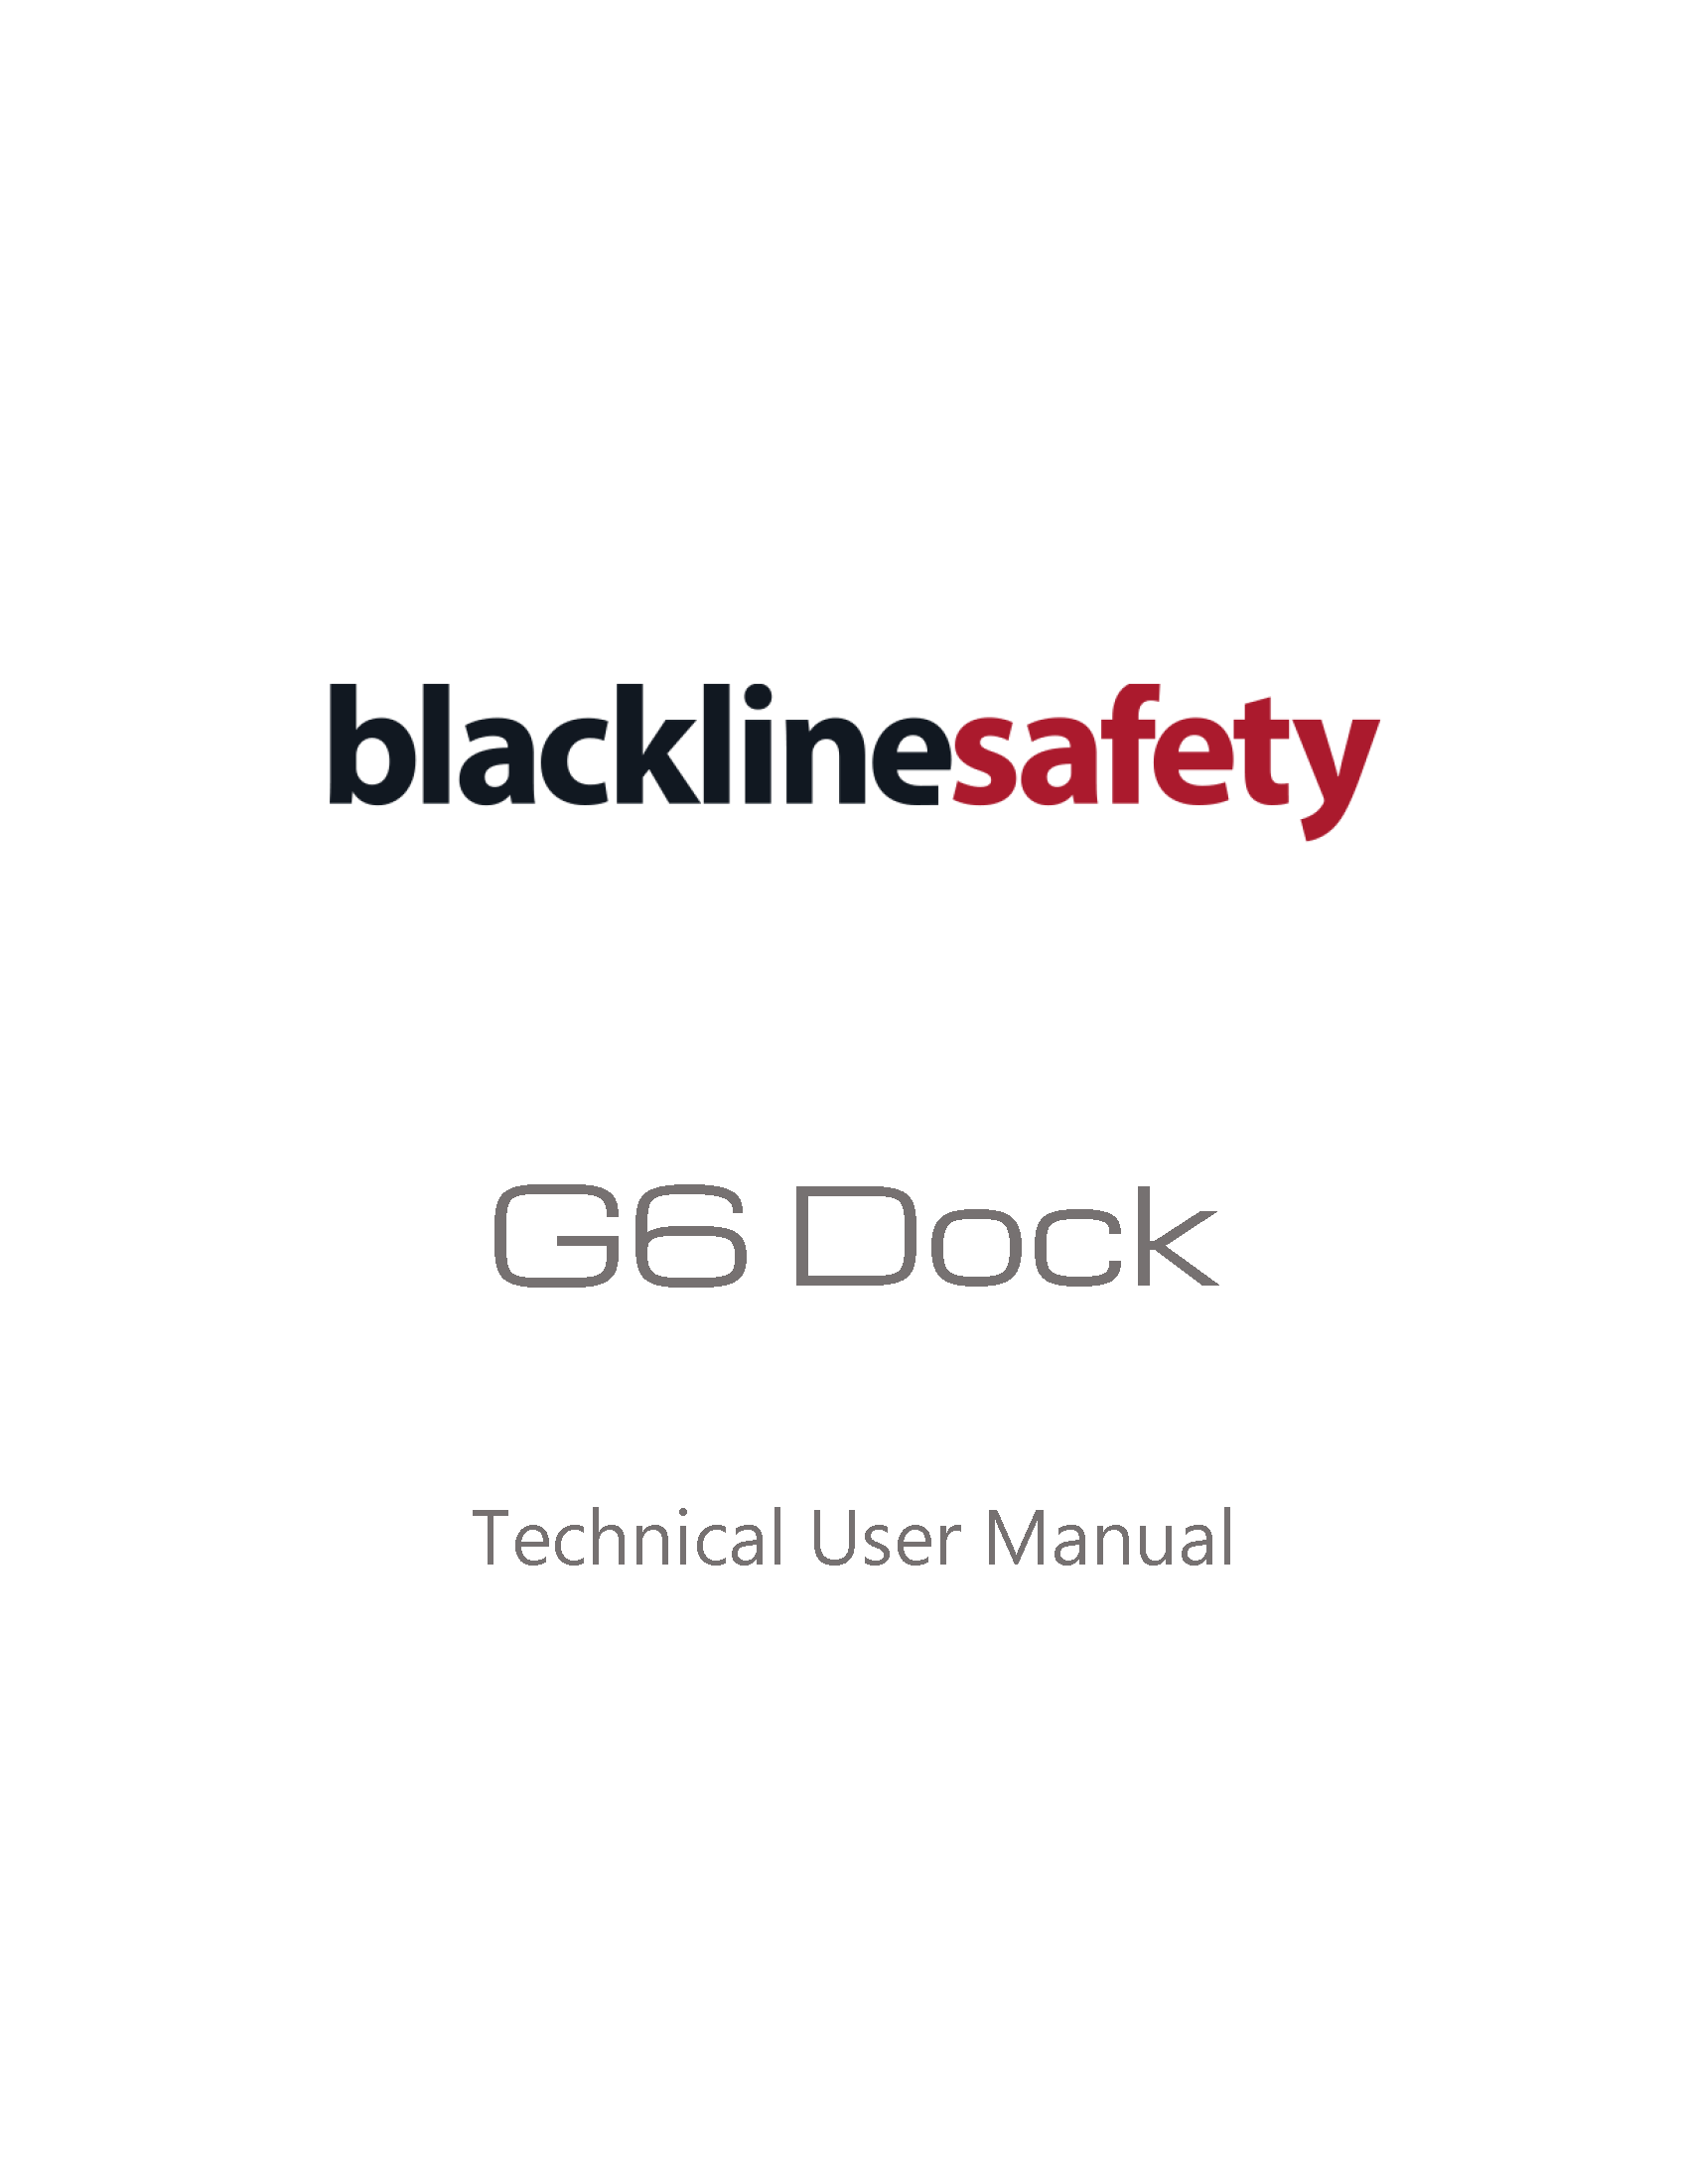 G6 Dock Technical User Manual_R1 - EN Cover Page